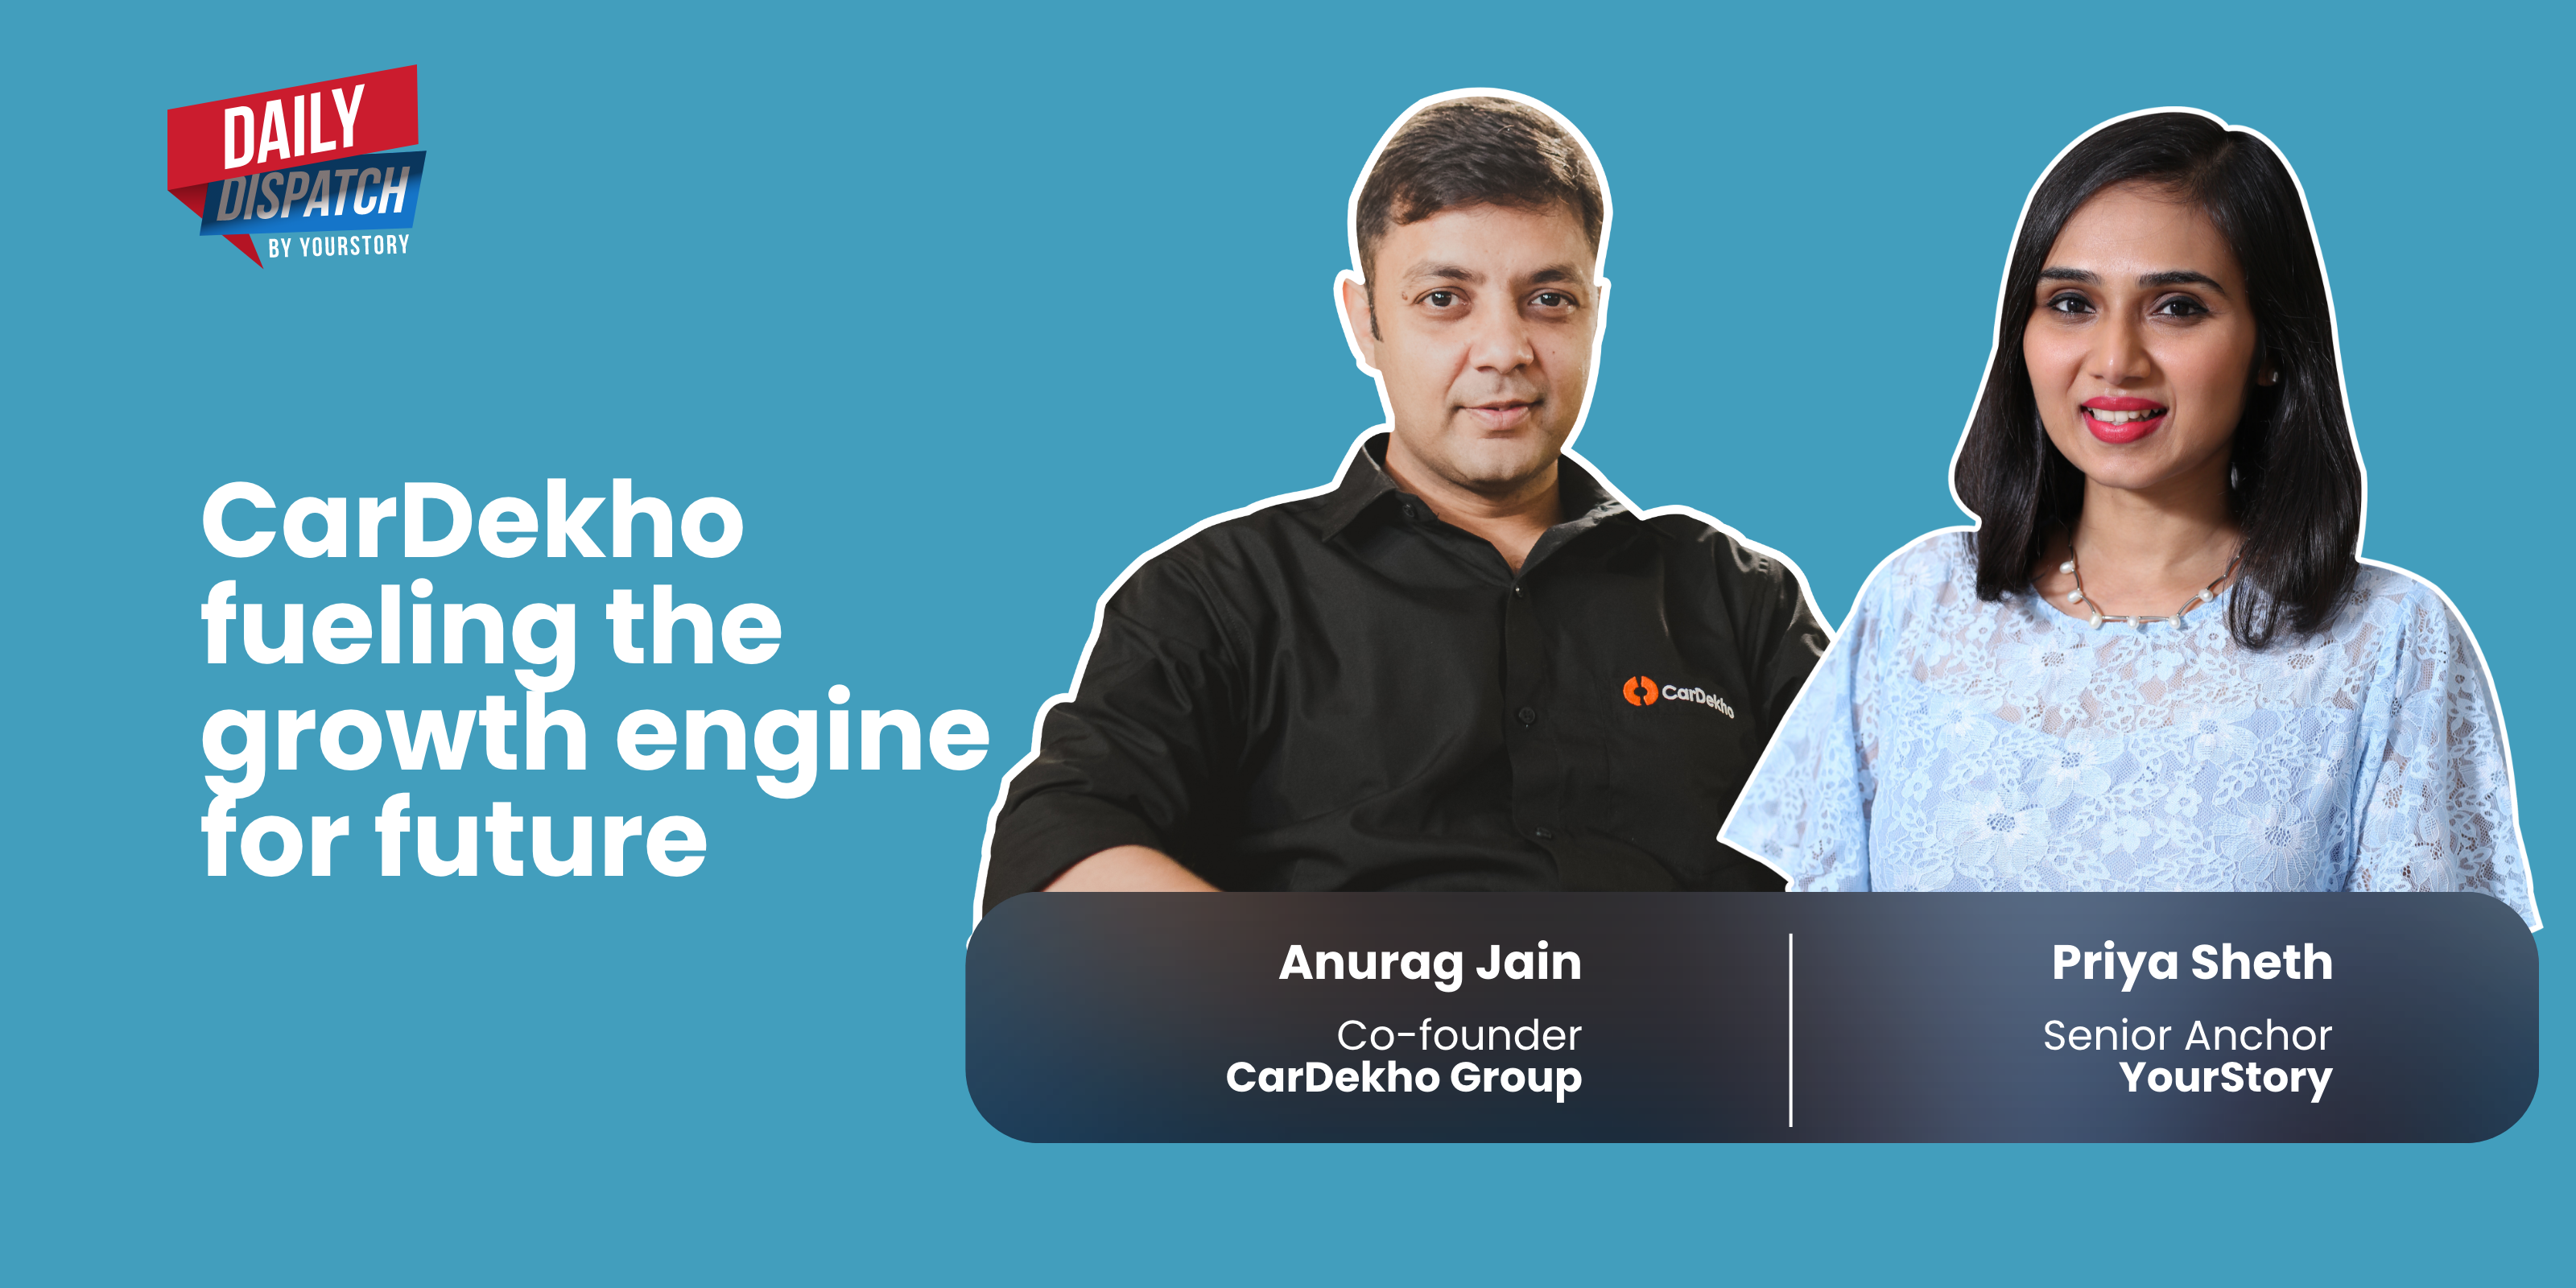 CarDekho’s plans to go slow and steady comes with strong expansion plans and revenue targets 